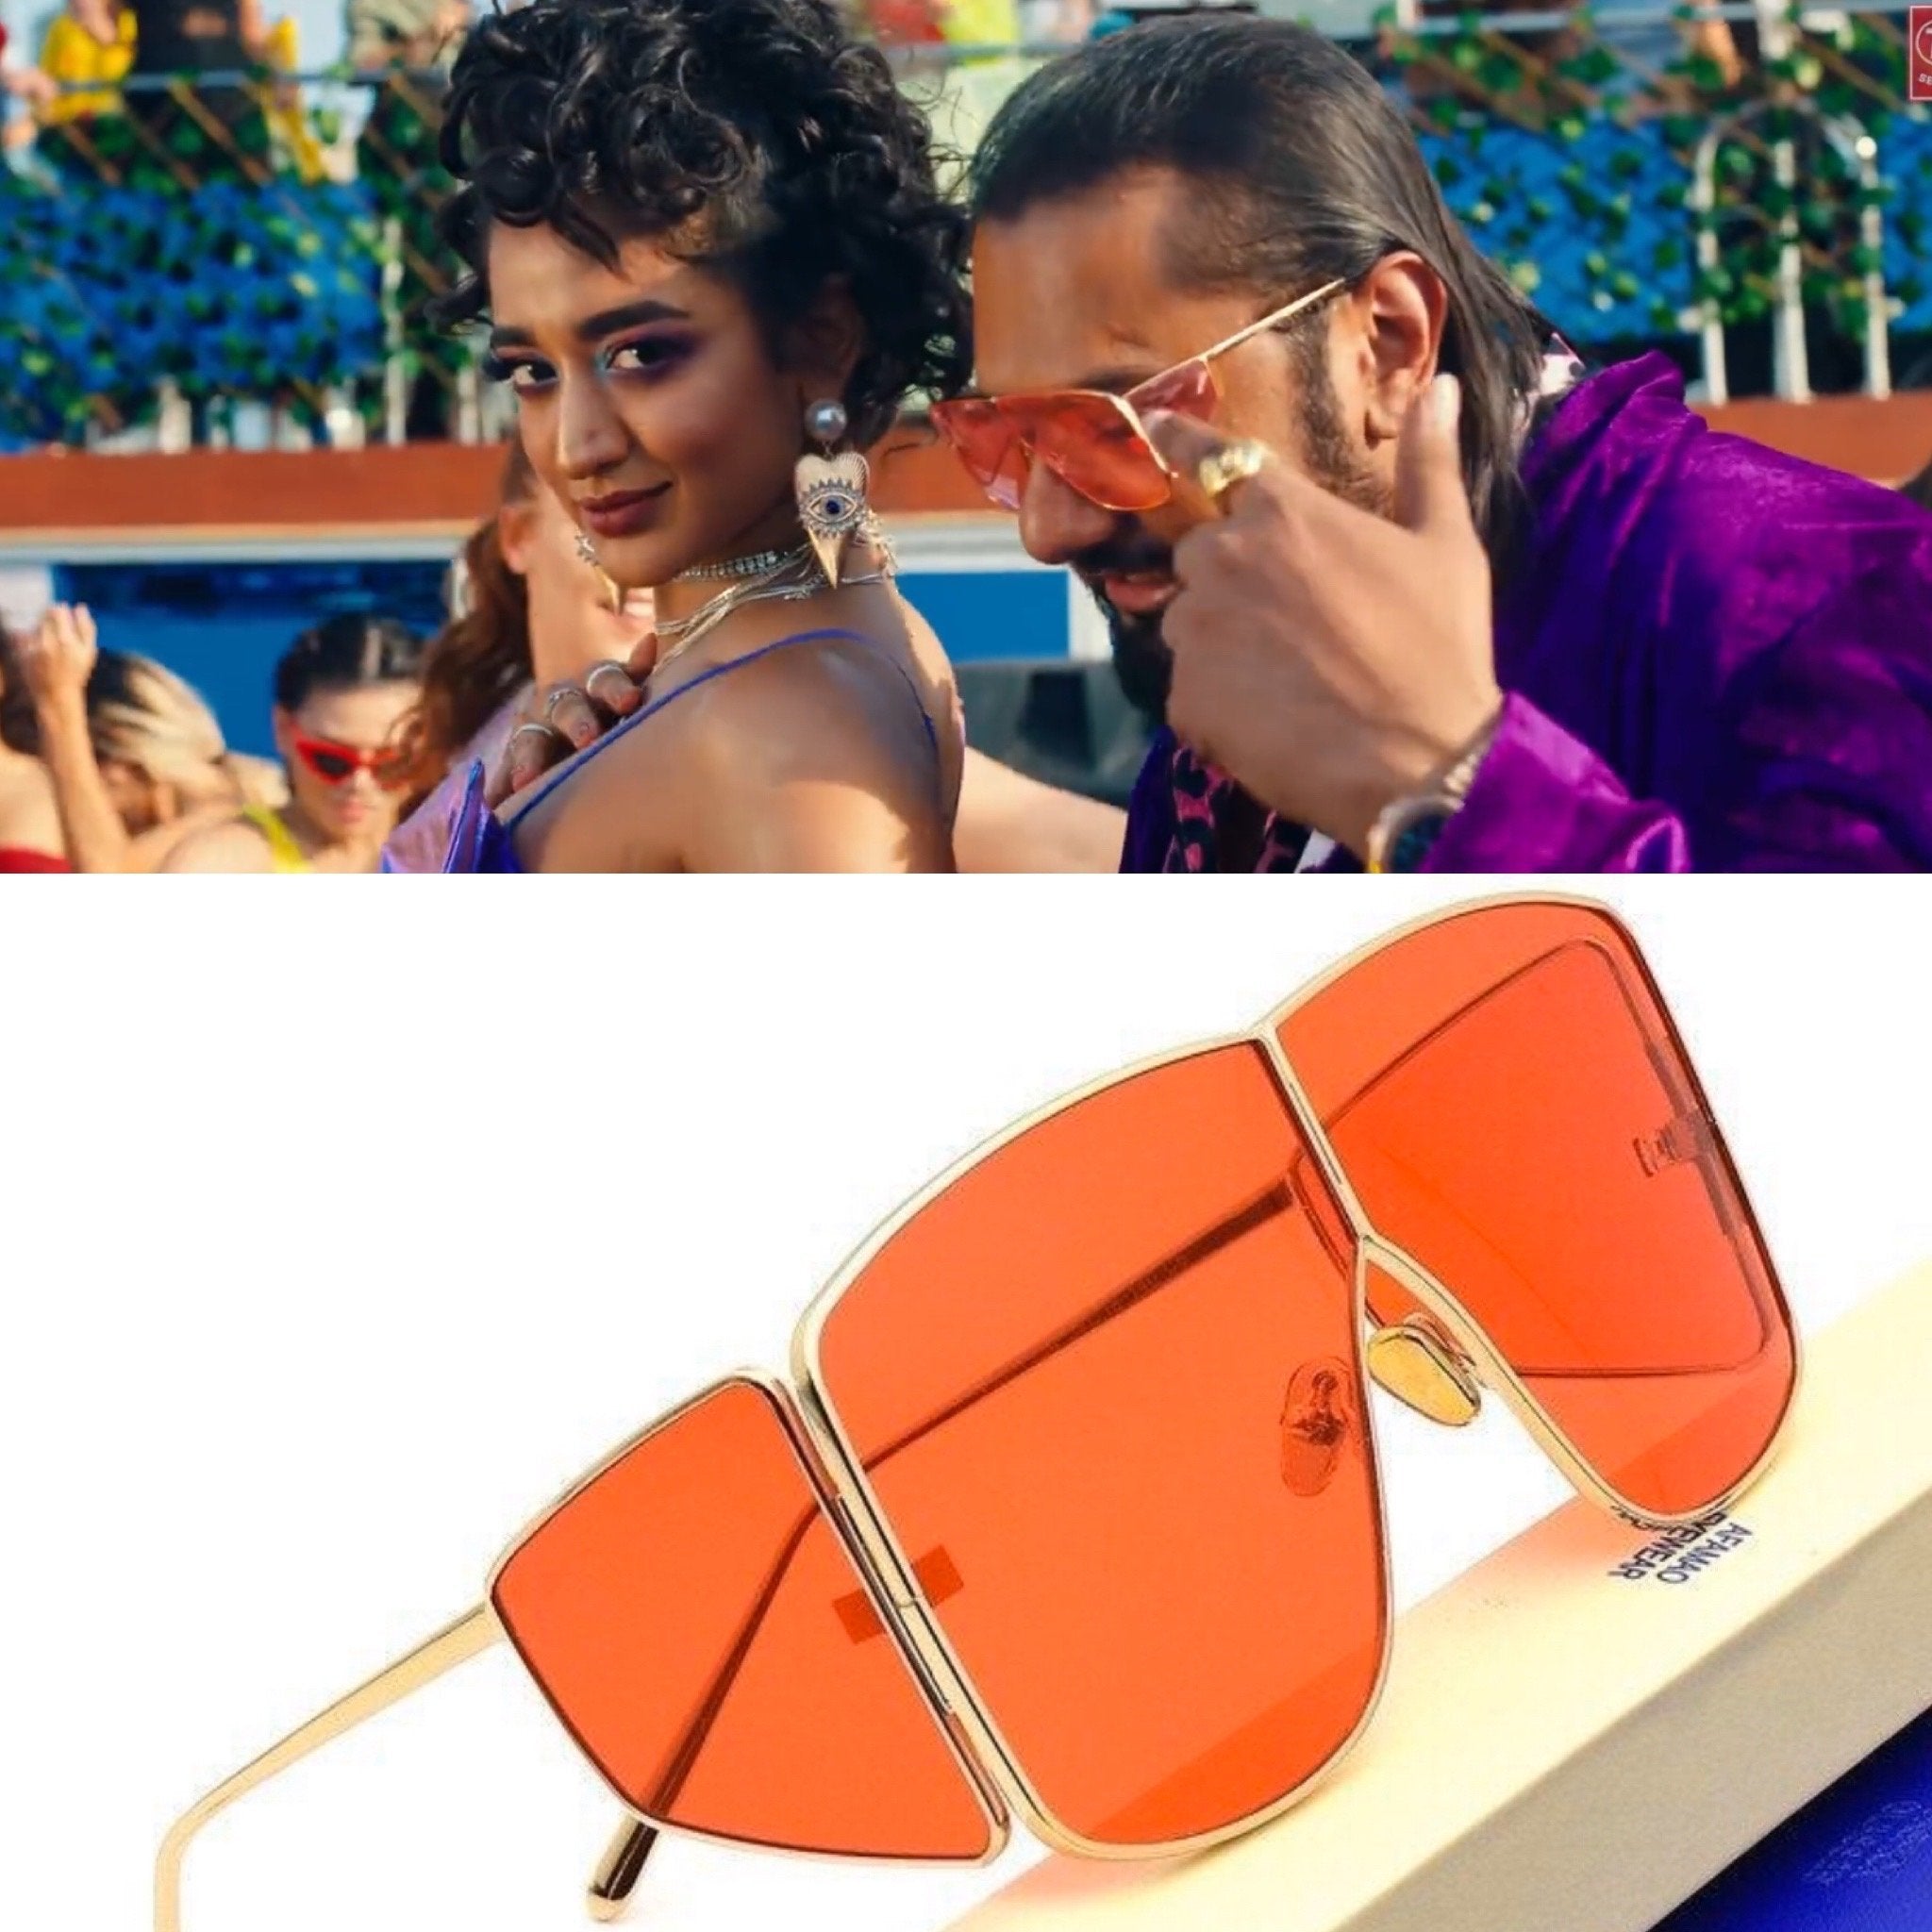 Buy Honey Singh Oversized Square Sunglasses For Men And Women-FunkyTradition Brown